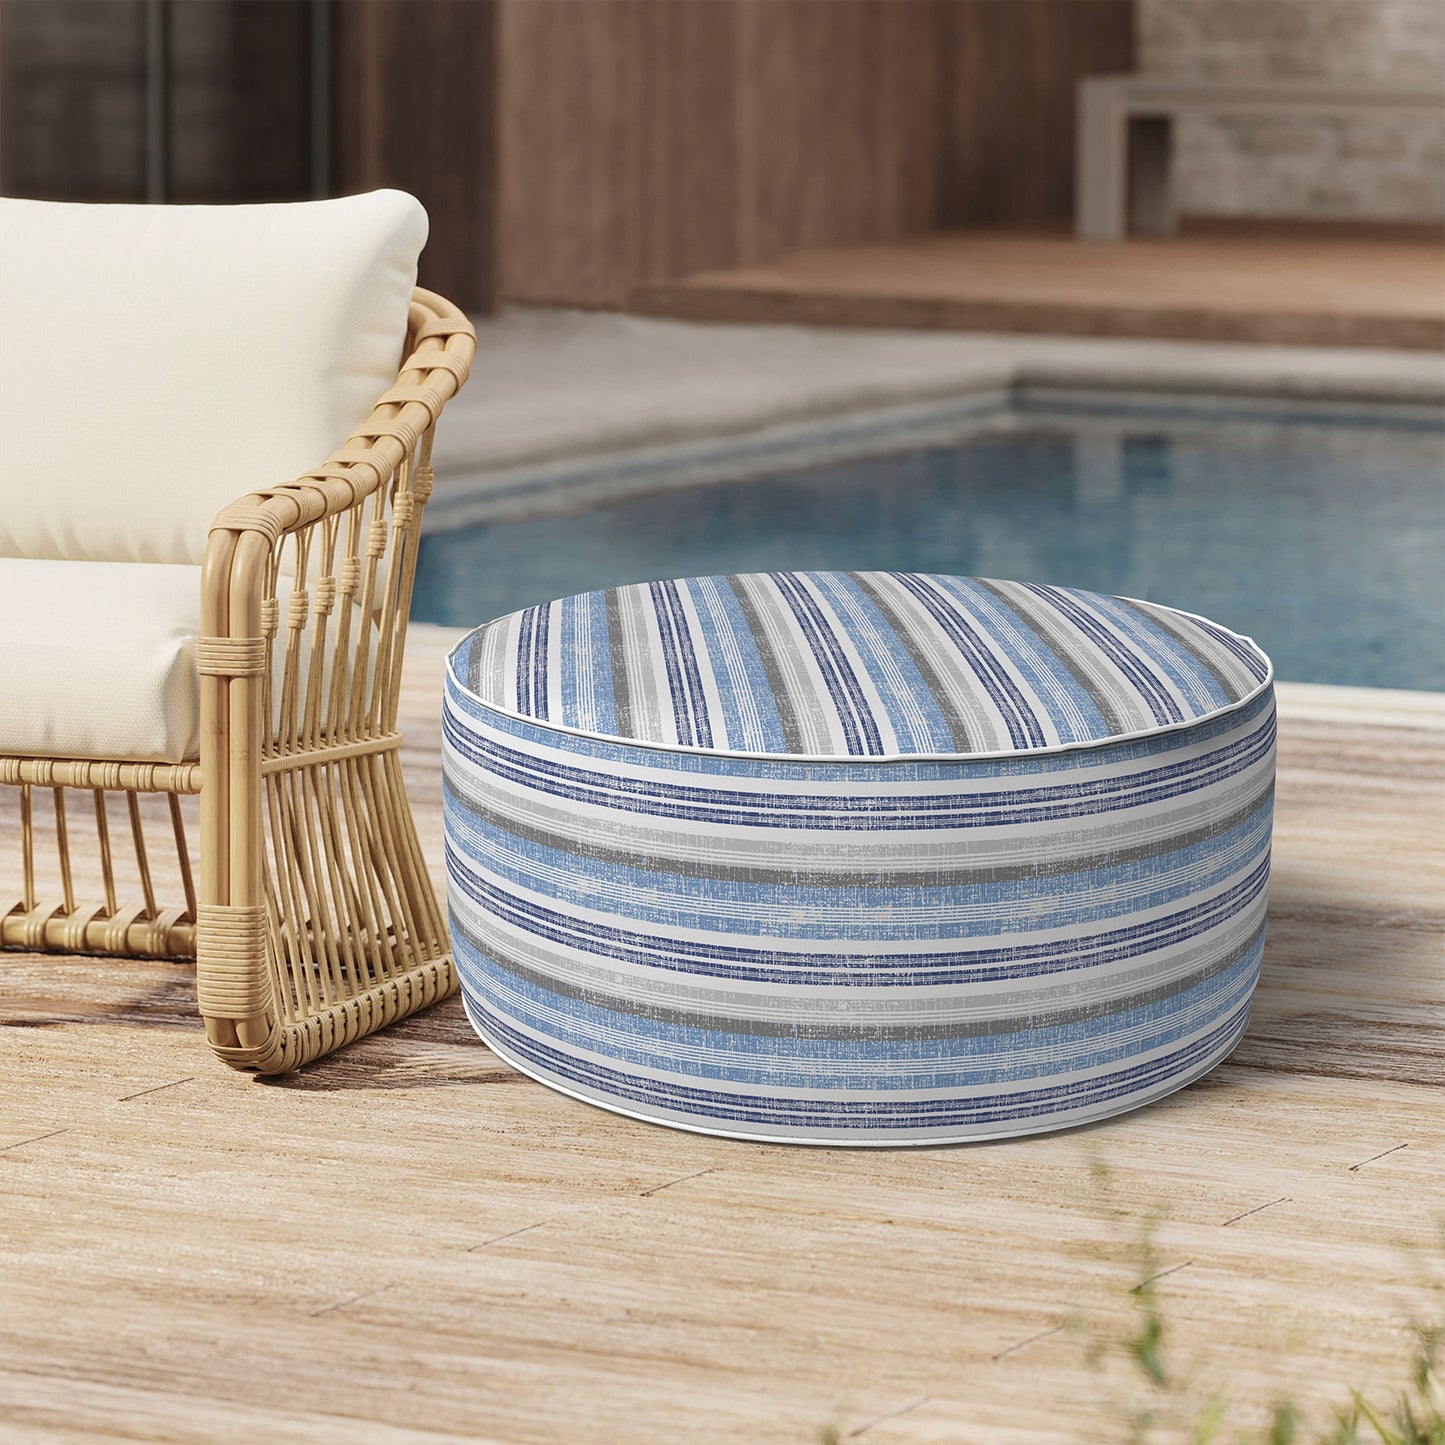 Outdoor Inflatable Stool Ottoman, All Weather Portable Footrest Stool, Furniture Stool Ottomans for Home Garden Beach, D31”xH14”, Stripe Layered Blue